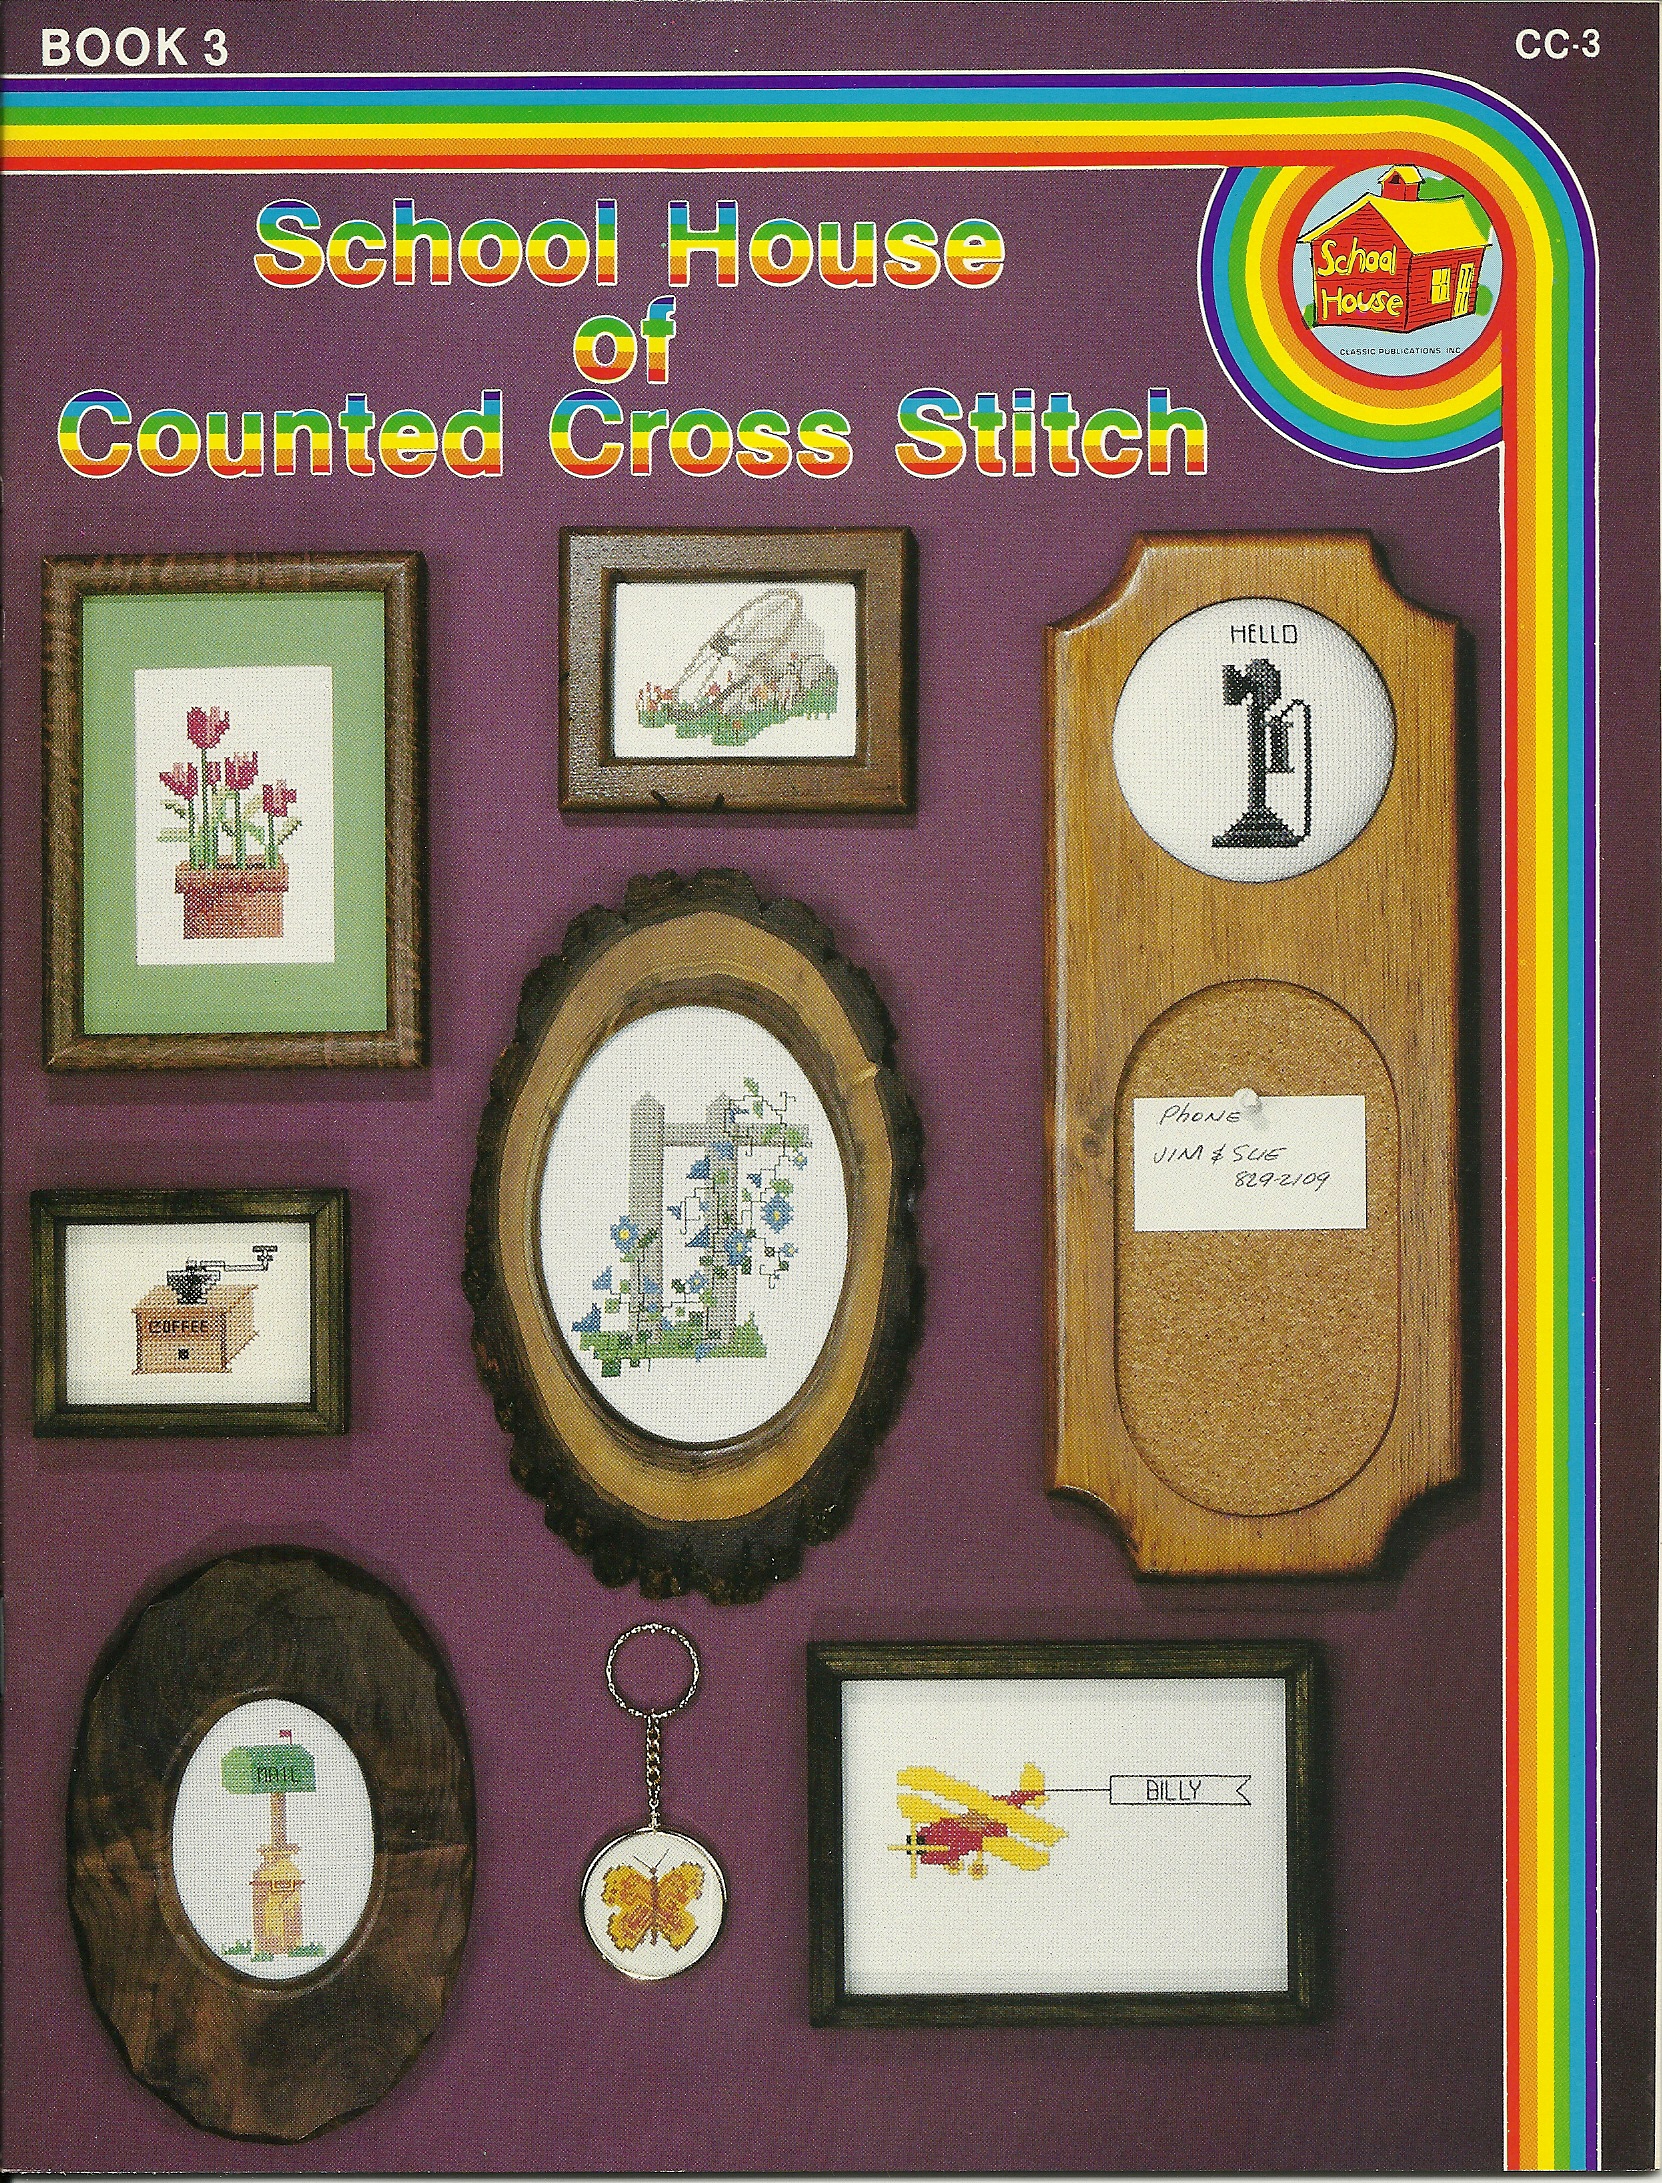 School House of Counted Cross Stitch  Book 3